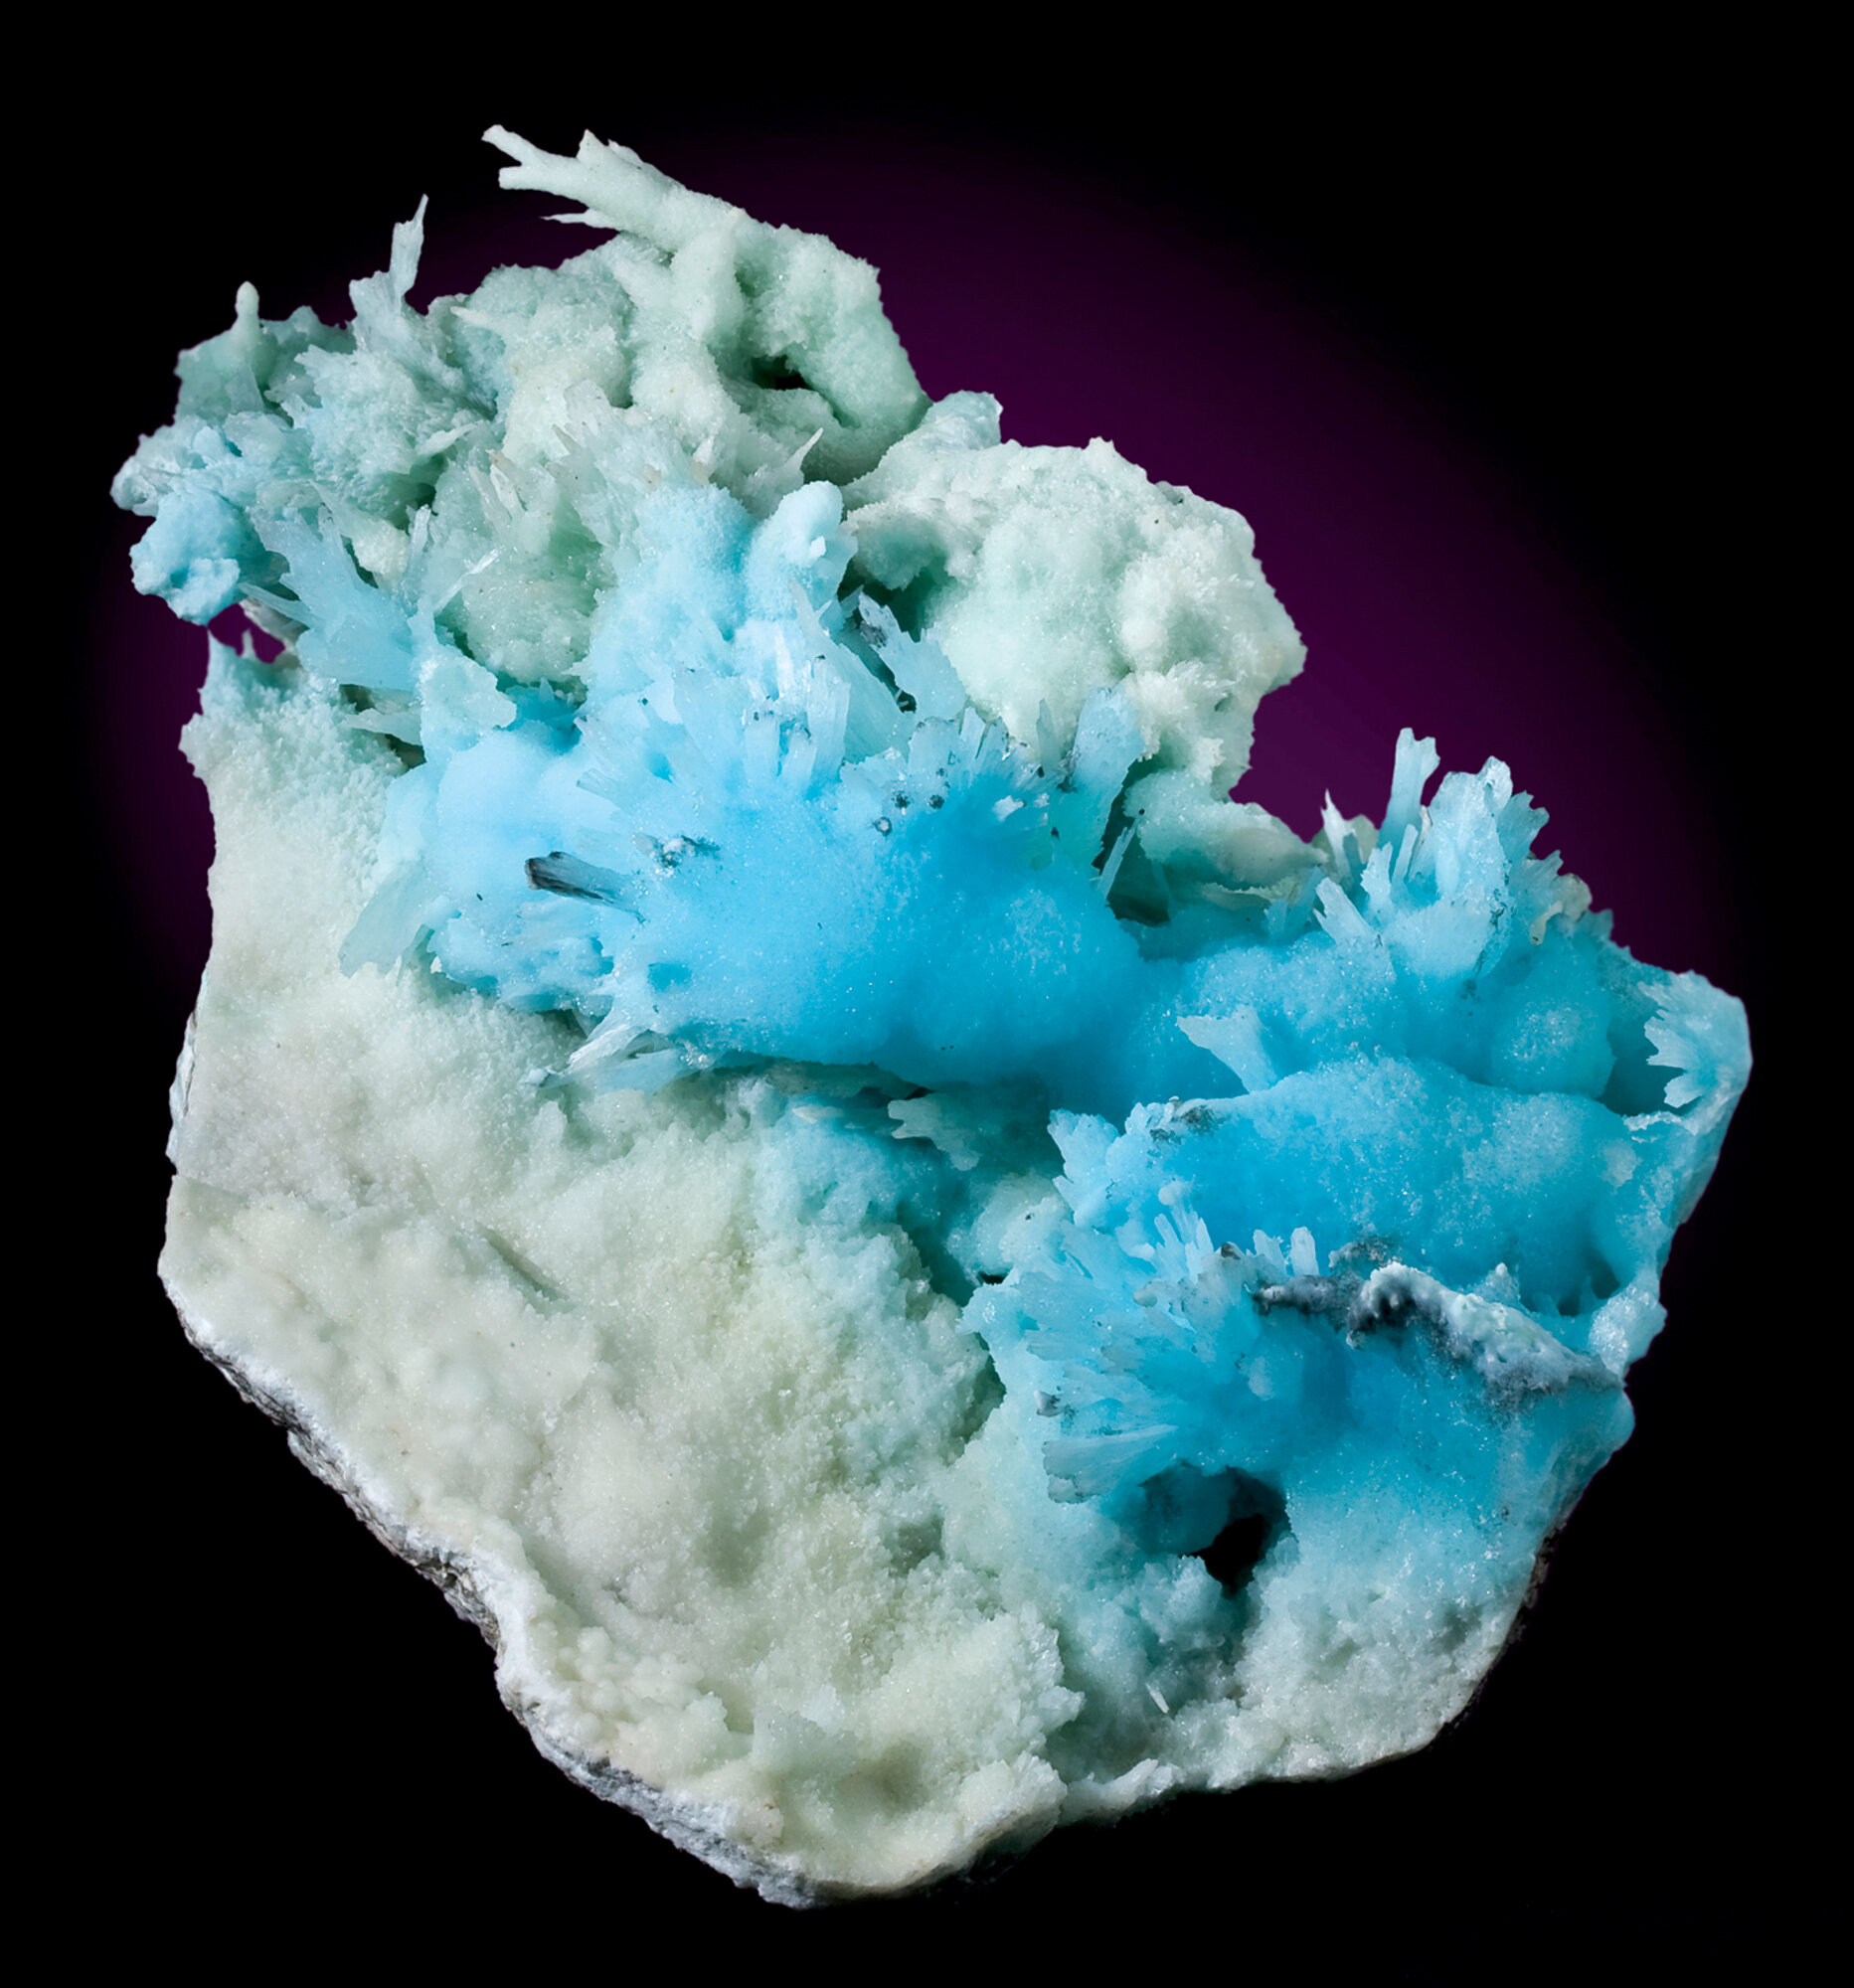  Aragonite colored by copper, 31 cm, from Maoniuping, Mianning County (adjacent to Xichang County, originally cited as the locality), Liangshan Autonomous Prefecture, Sichuan Province, China. 